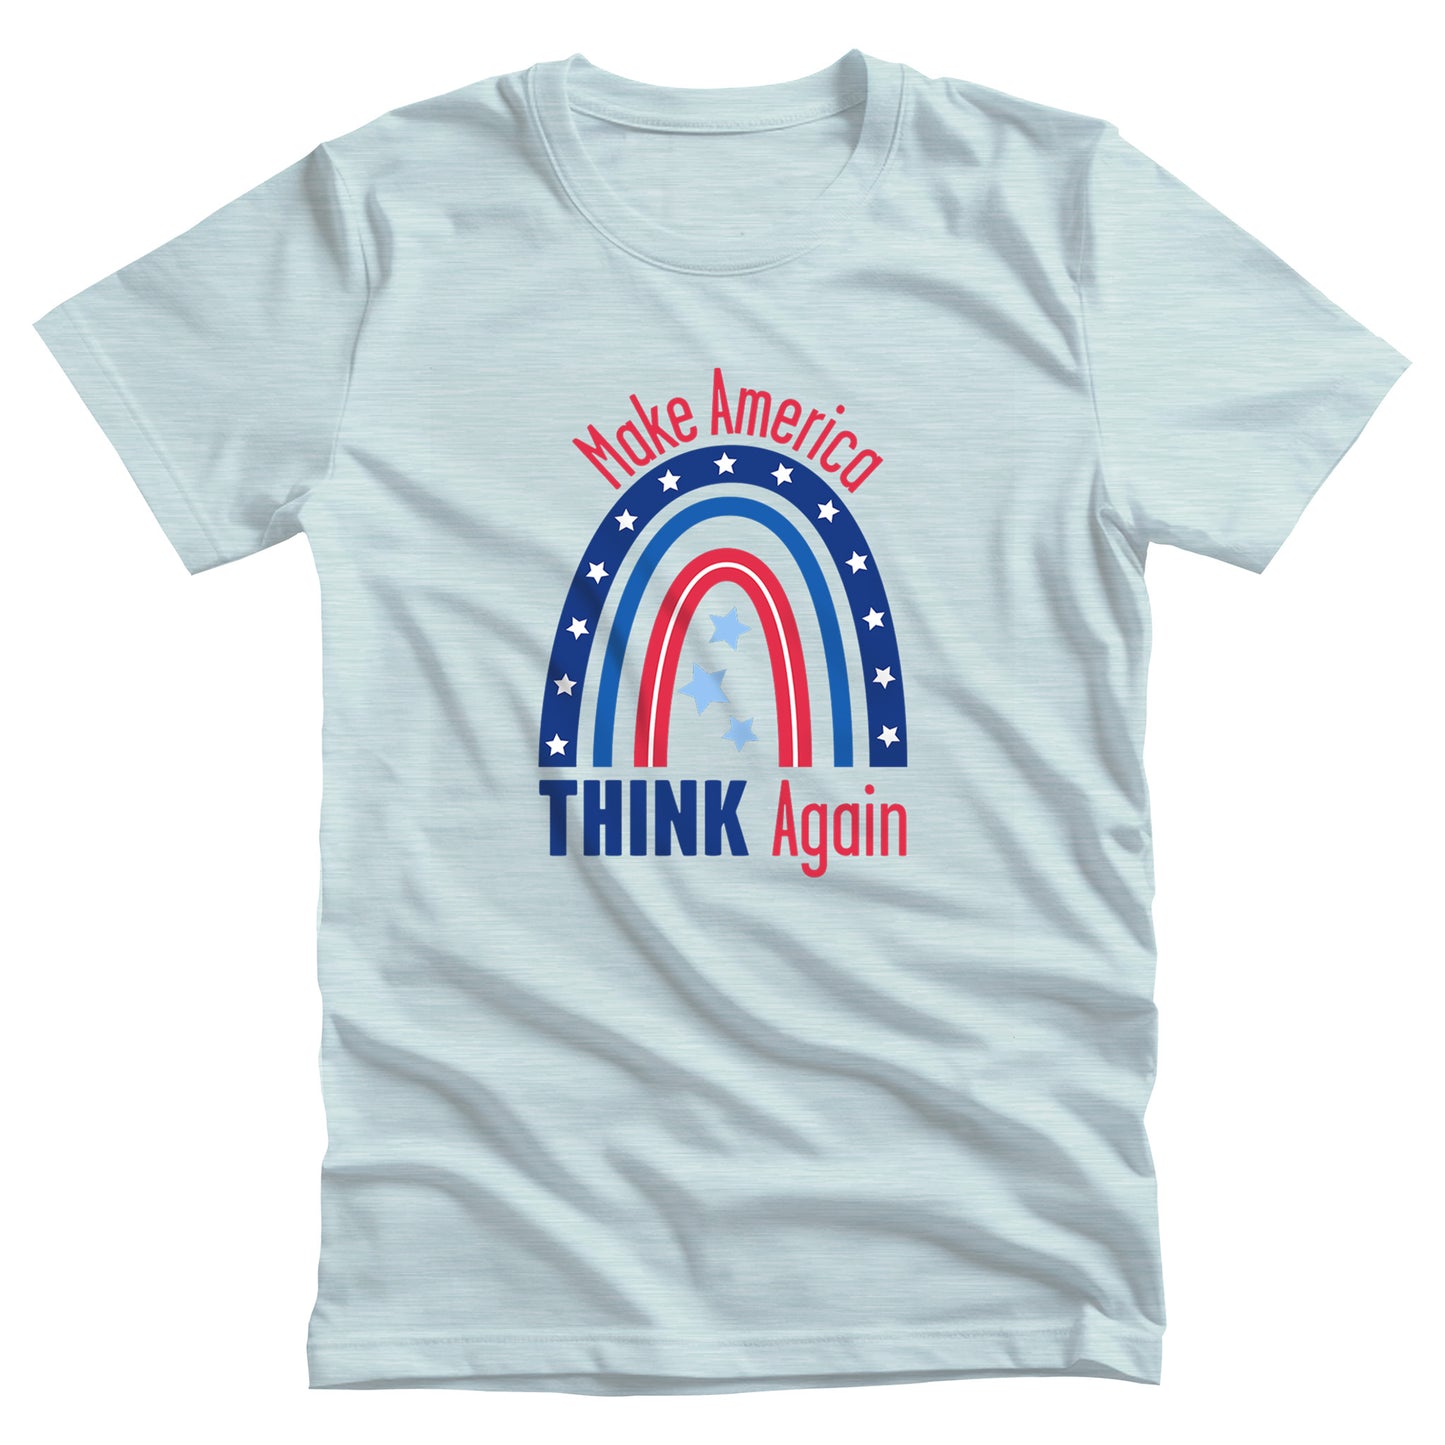 Heather Ice Blue color unisex t-shirt that says, “Make America THINK Again” with a graphic of a blue and red rainbow. “Make America” is red and arched over the rainbow. “THINK Again” is beneath the rainbow with “THINK” being blue and “Again” being red.